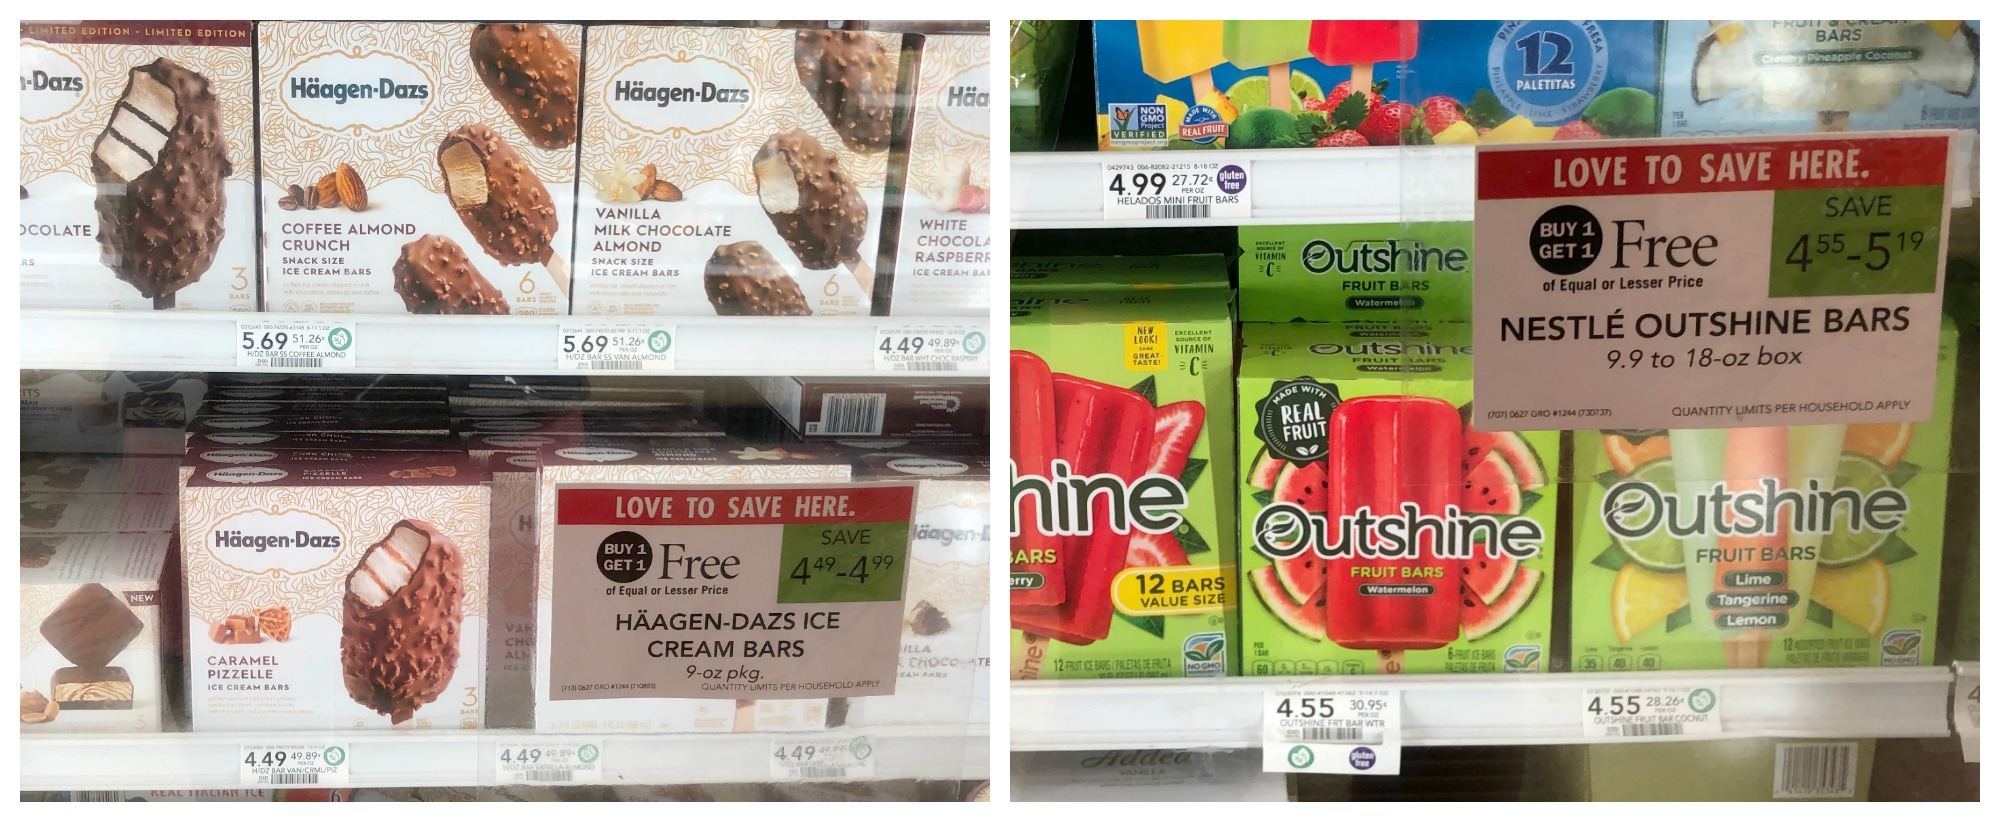 Perfect Week To Earn Your Publix Gift Card in  The Have Happy On Hand Reward Offer (BOGO Sales On Häagen-Dazs & Outshine Bars!) on I Heart Publix